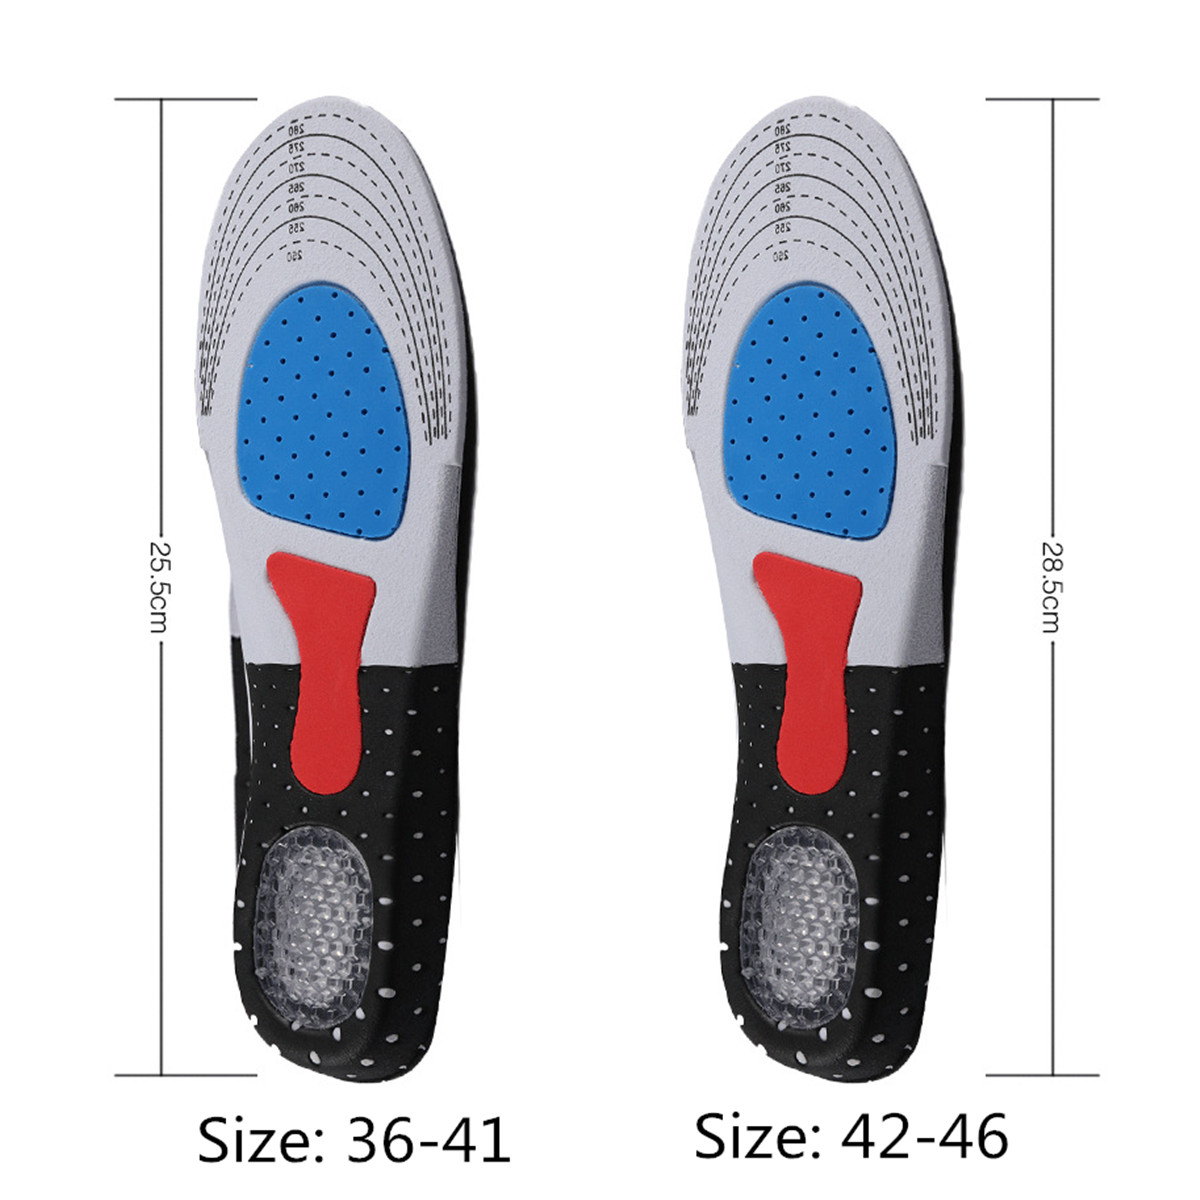 Caresole Plantar Fasciitis Insoles Foot Confort Plus Feeling Younger ...